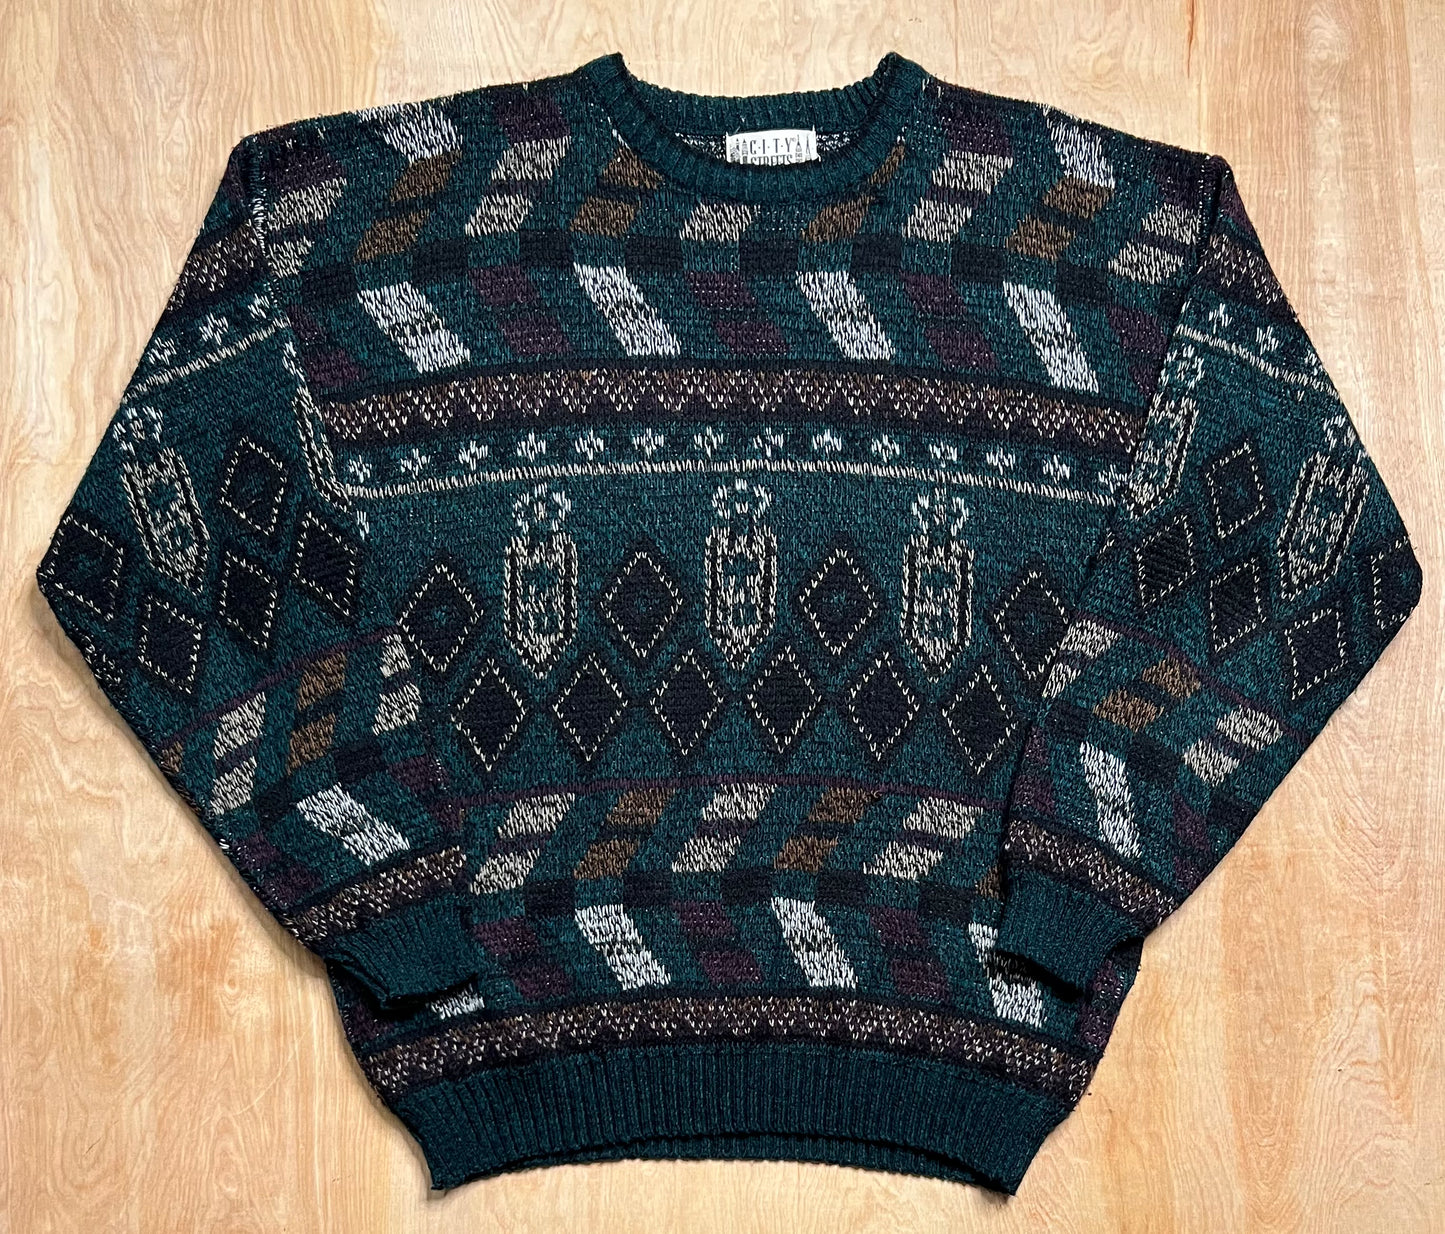 Vintage City Streets Sweater